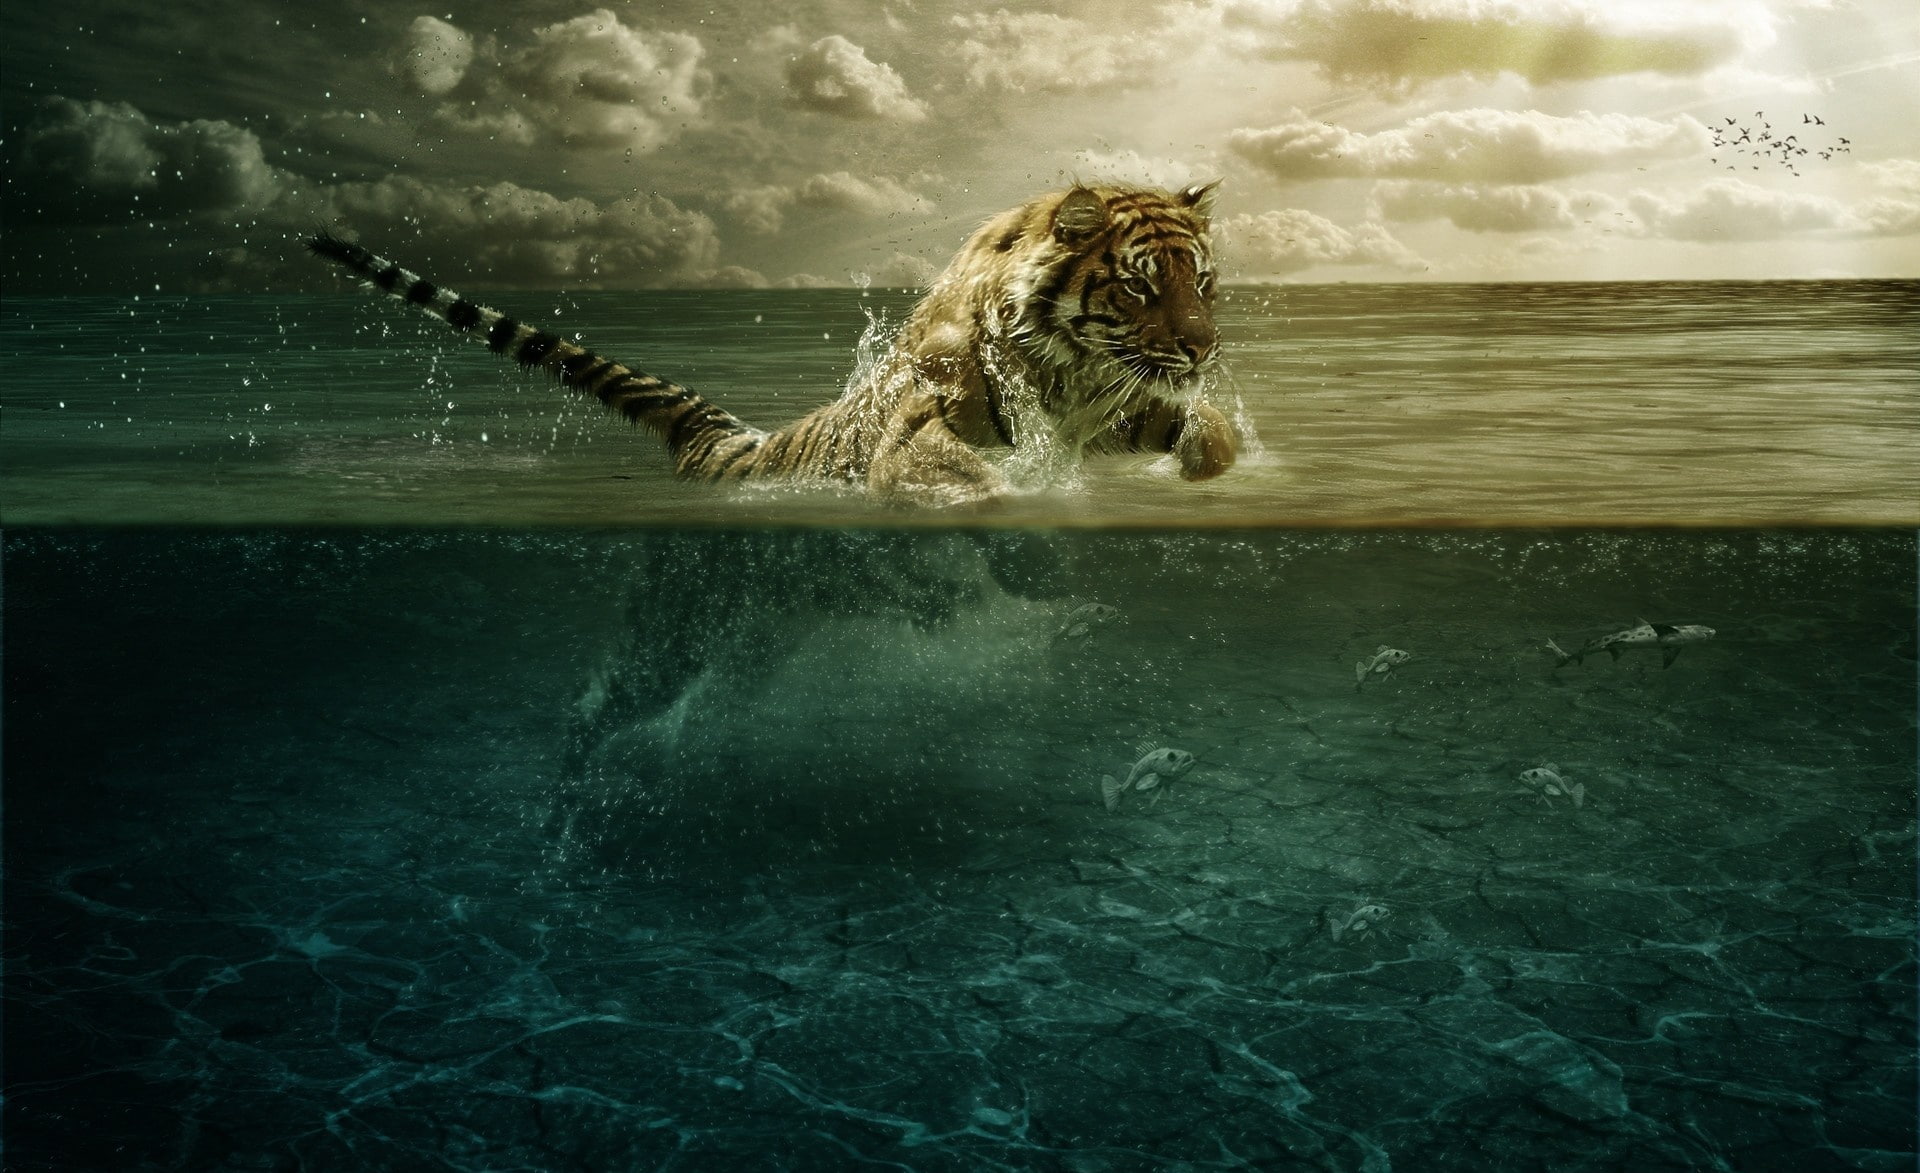 Tiger Playing in Water, tiger in body of water wallpaper, Aero